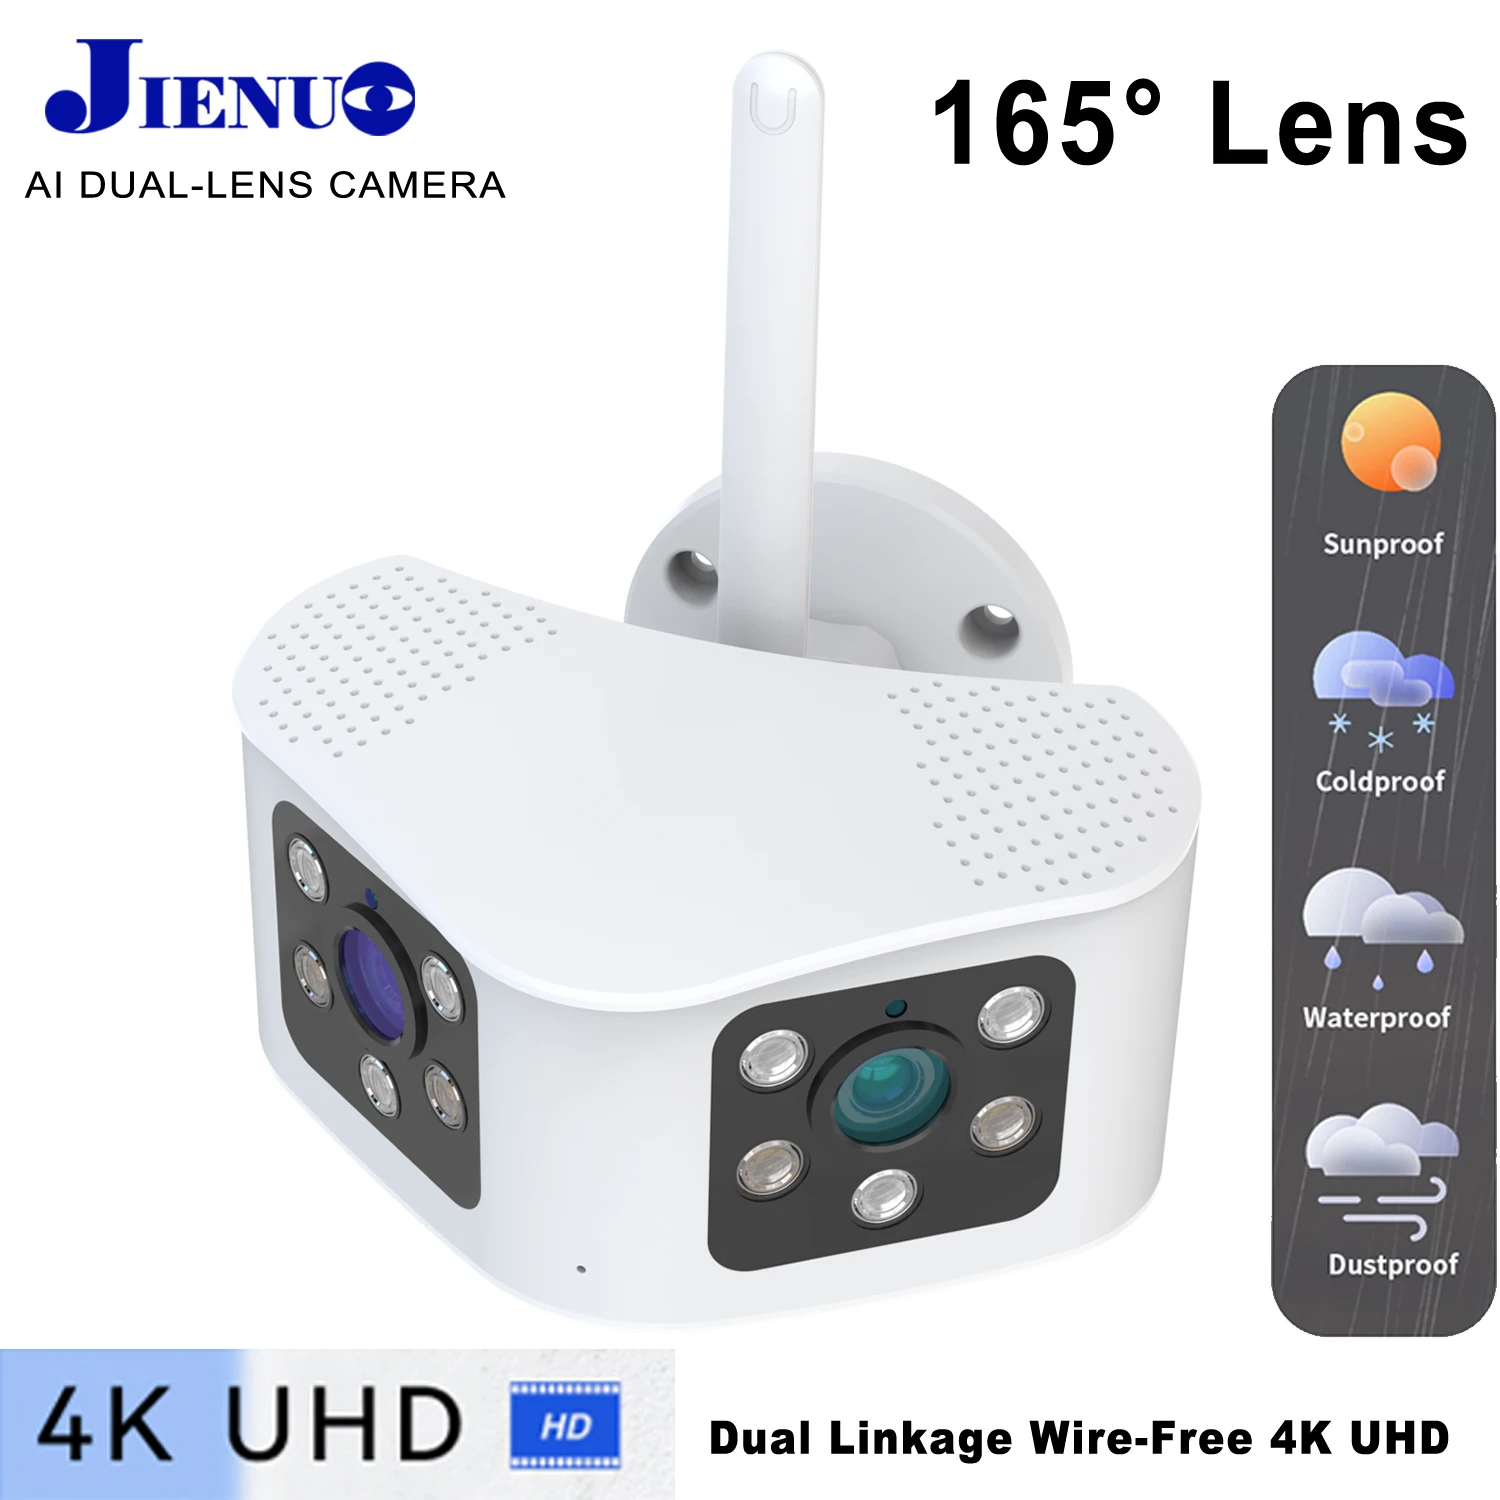 6MP Dual-lens Panorama Wireless Camera IP 4K HD Cctv Security Surveillance Full Color Night Vision NightVision Wifi Home Net Cam